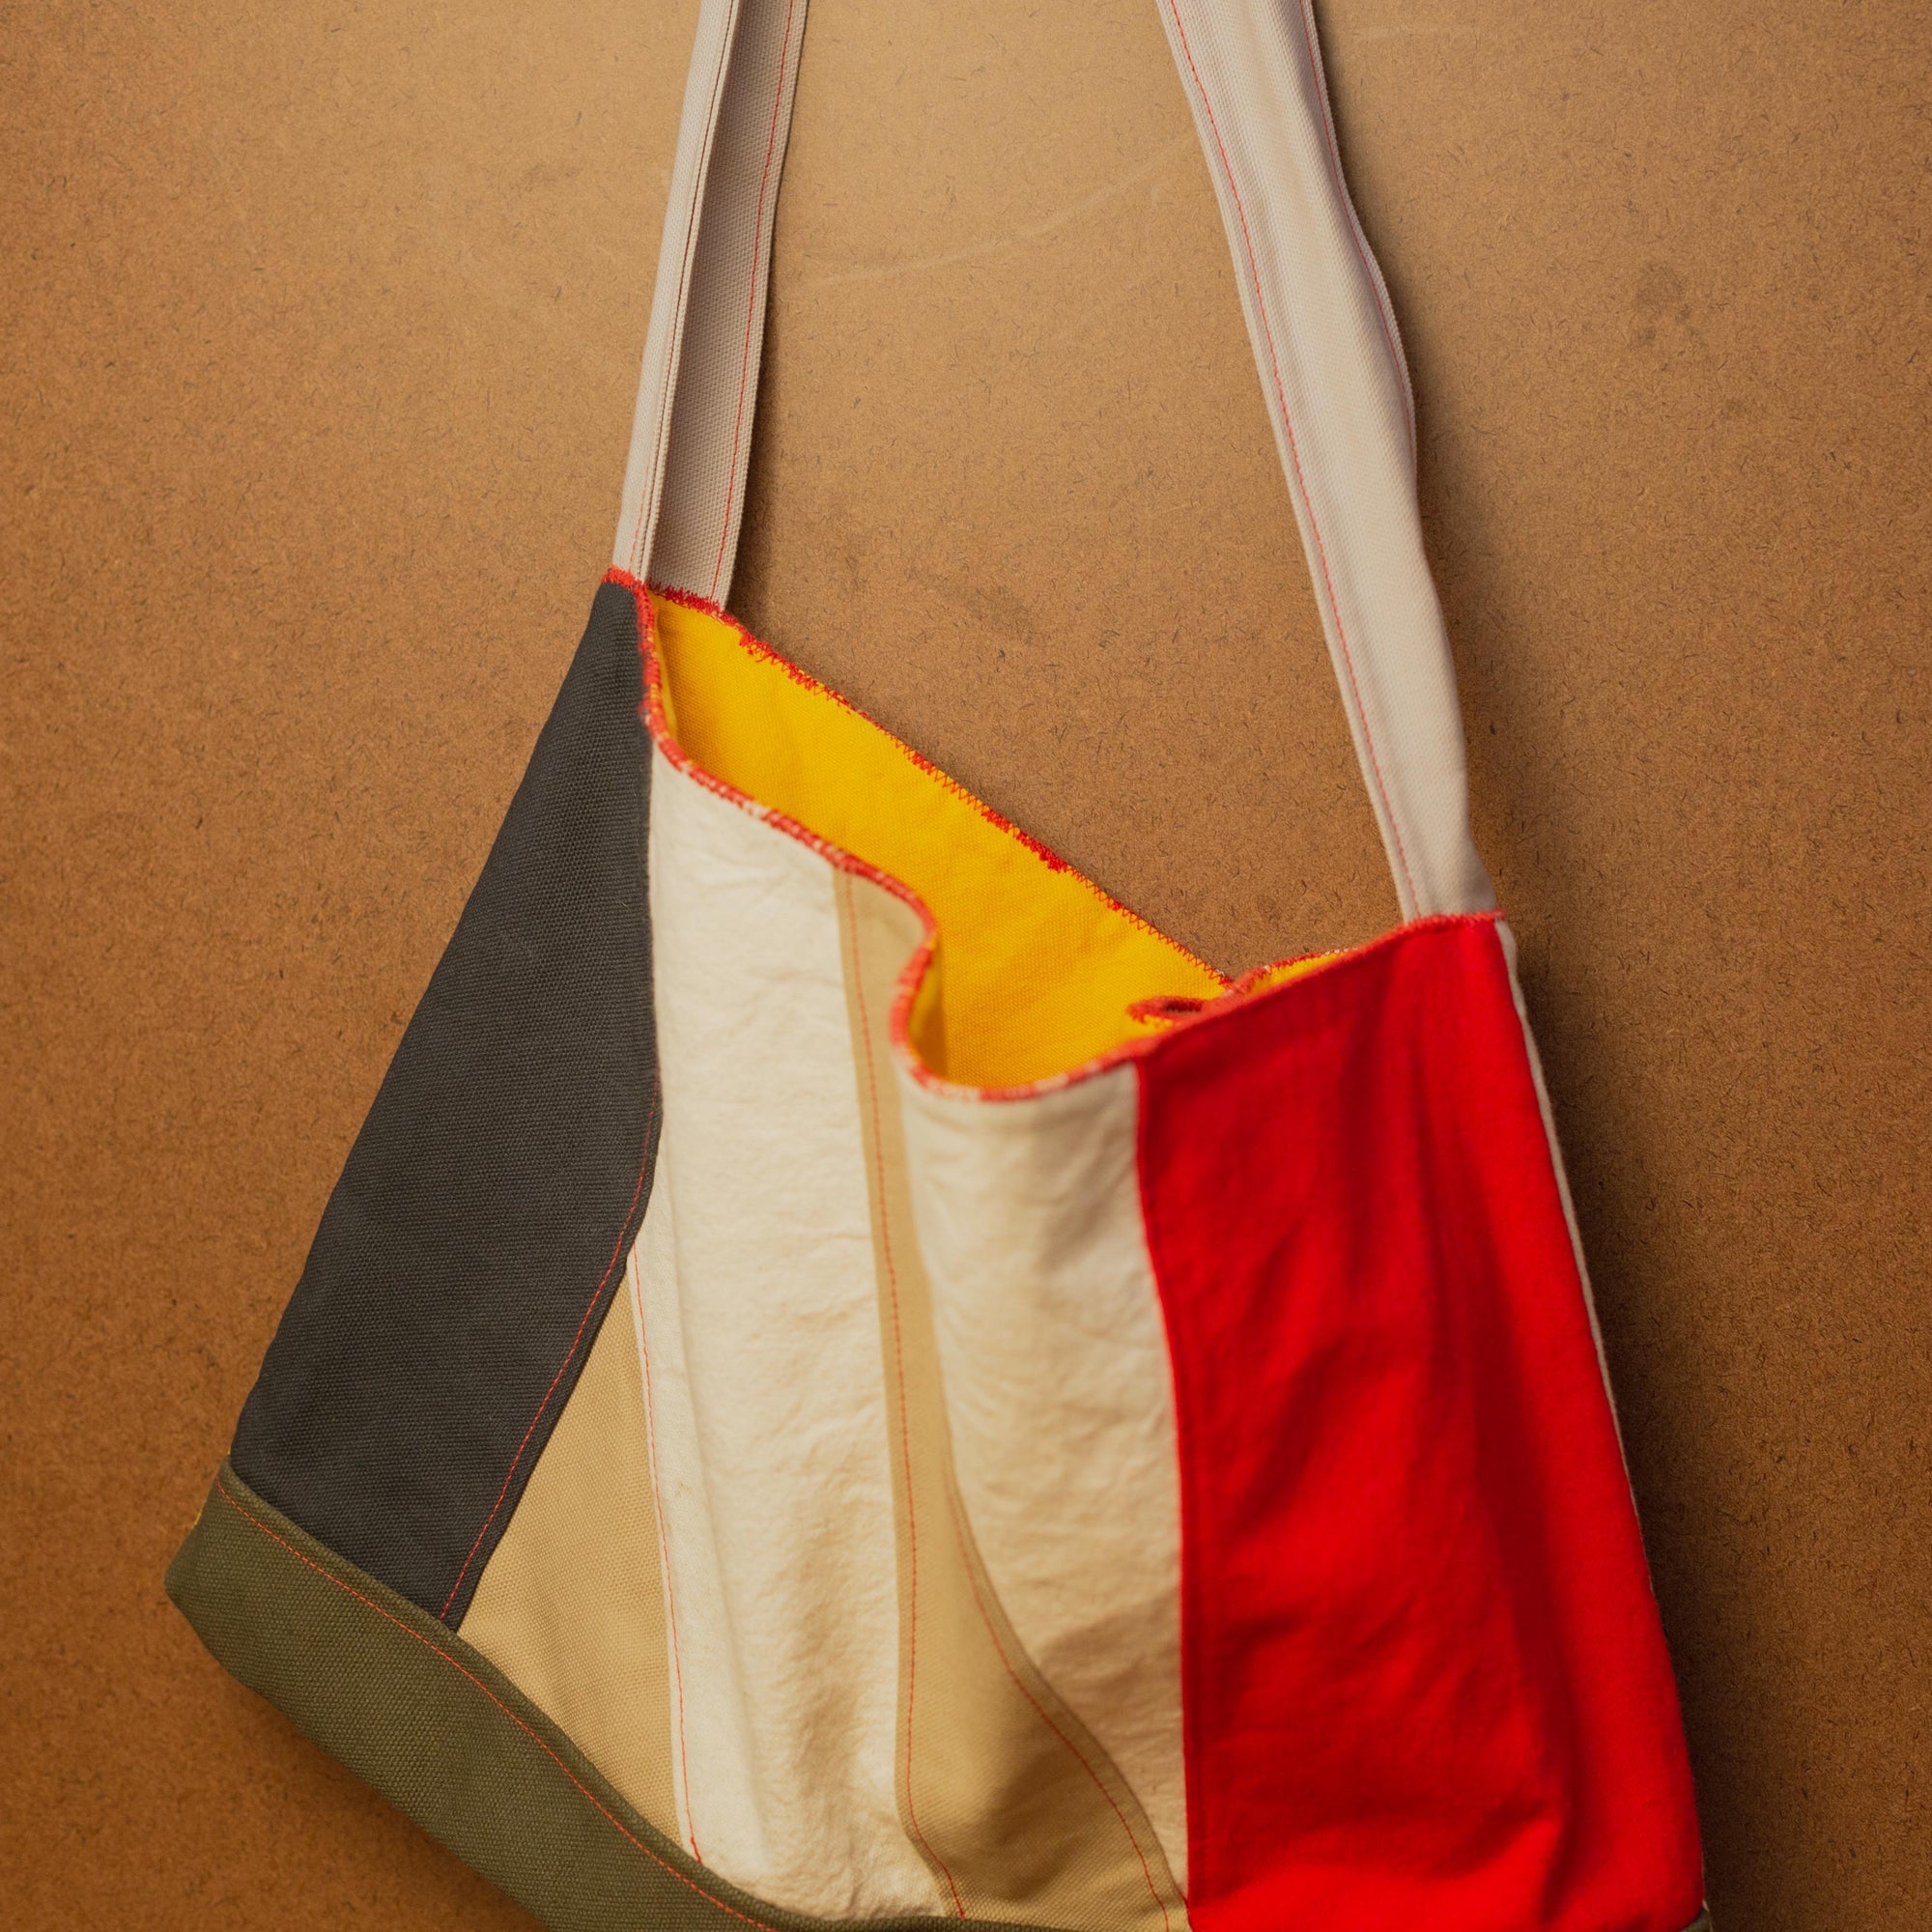 Bags by Cal Saxton